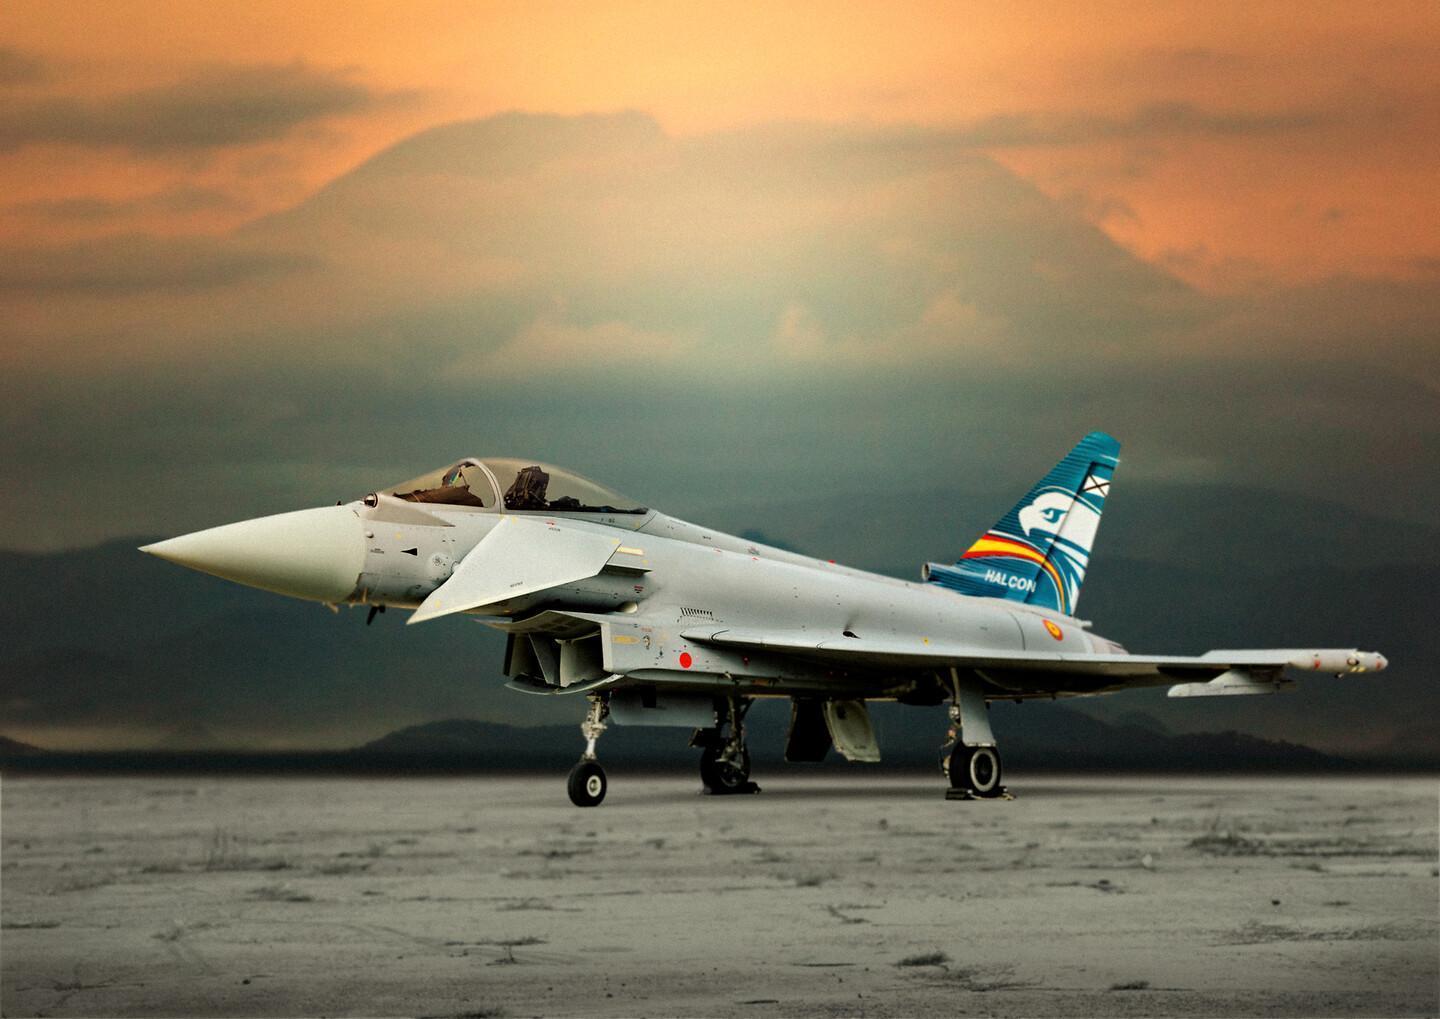 Eurofighter to Secure 26,000 Jobs in Spain Until 2060